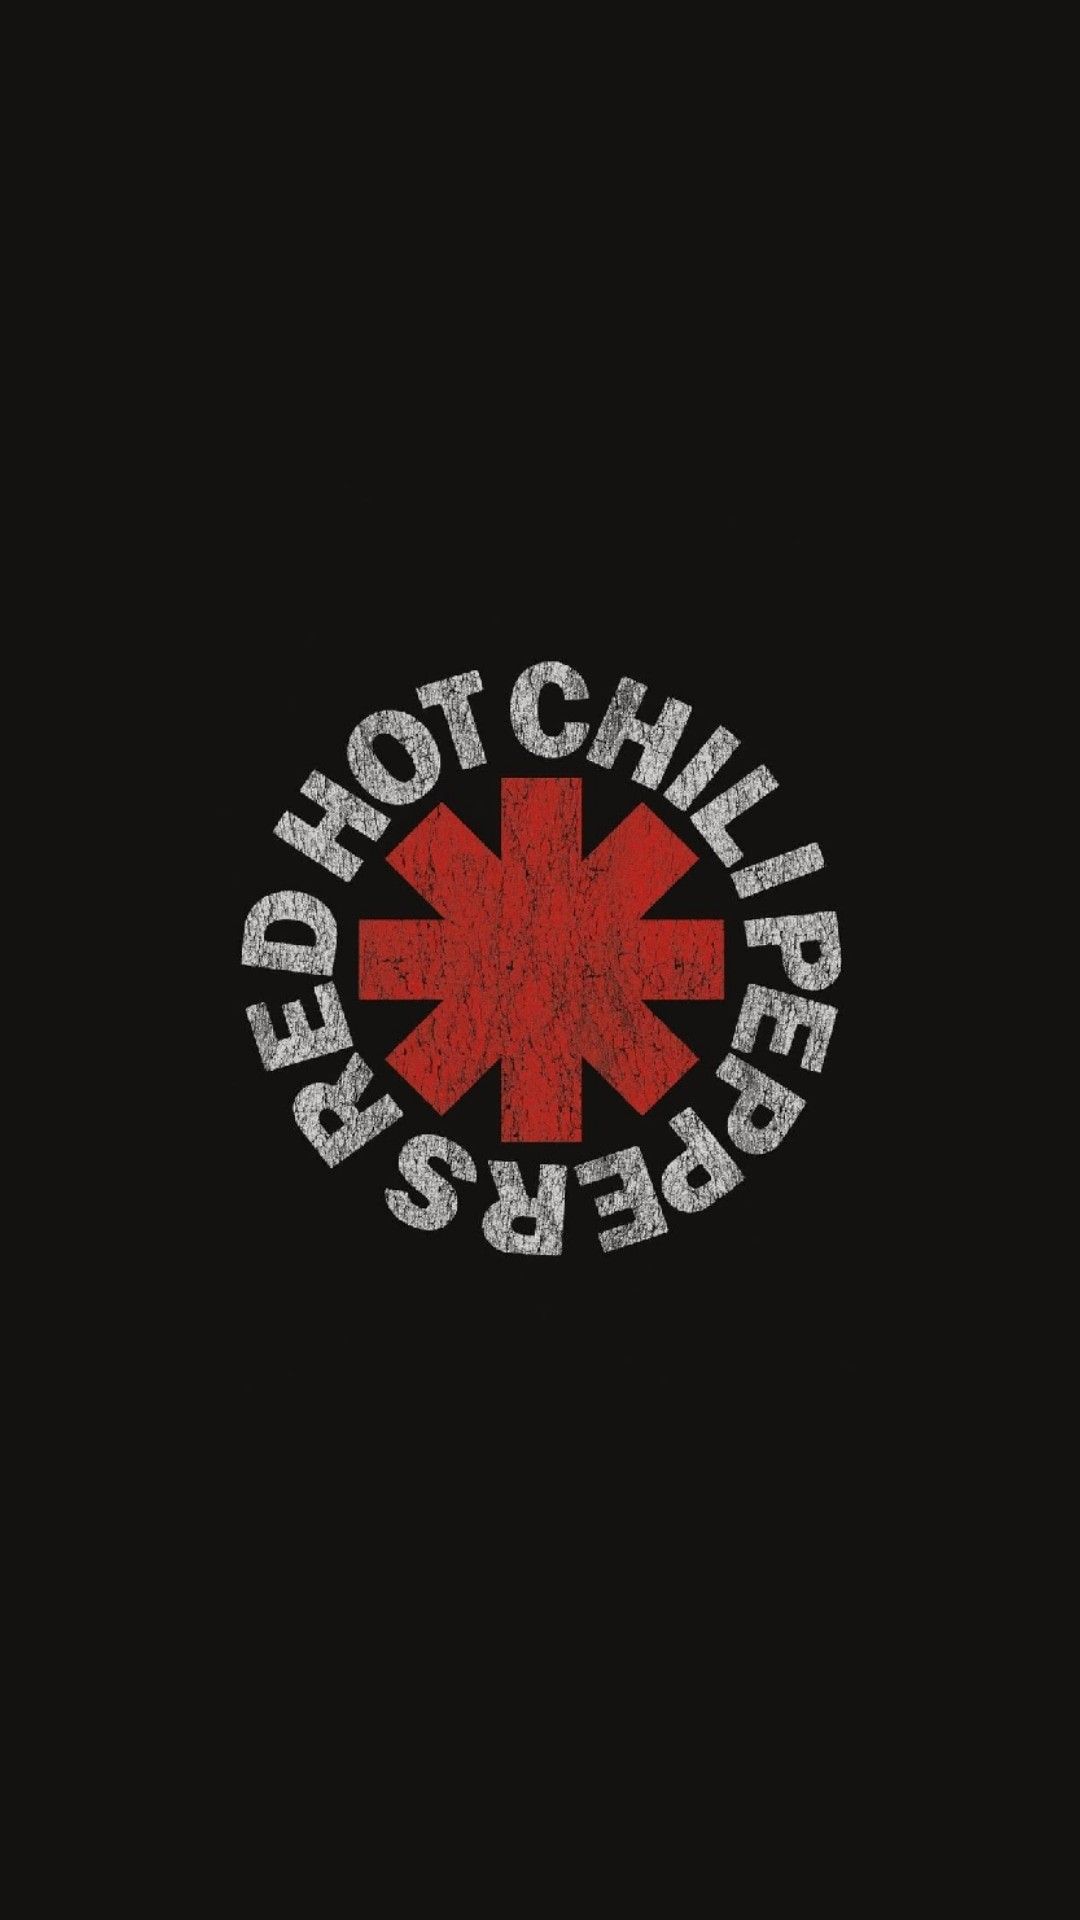 Red hot chili peppers wallpaper logo red hot chili peppers poster red hot chili peppers band red hot chili peppers album